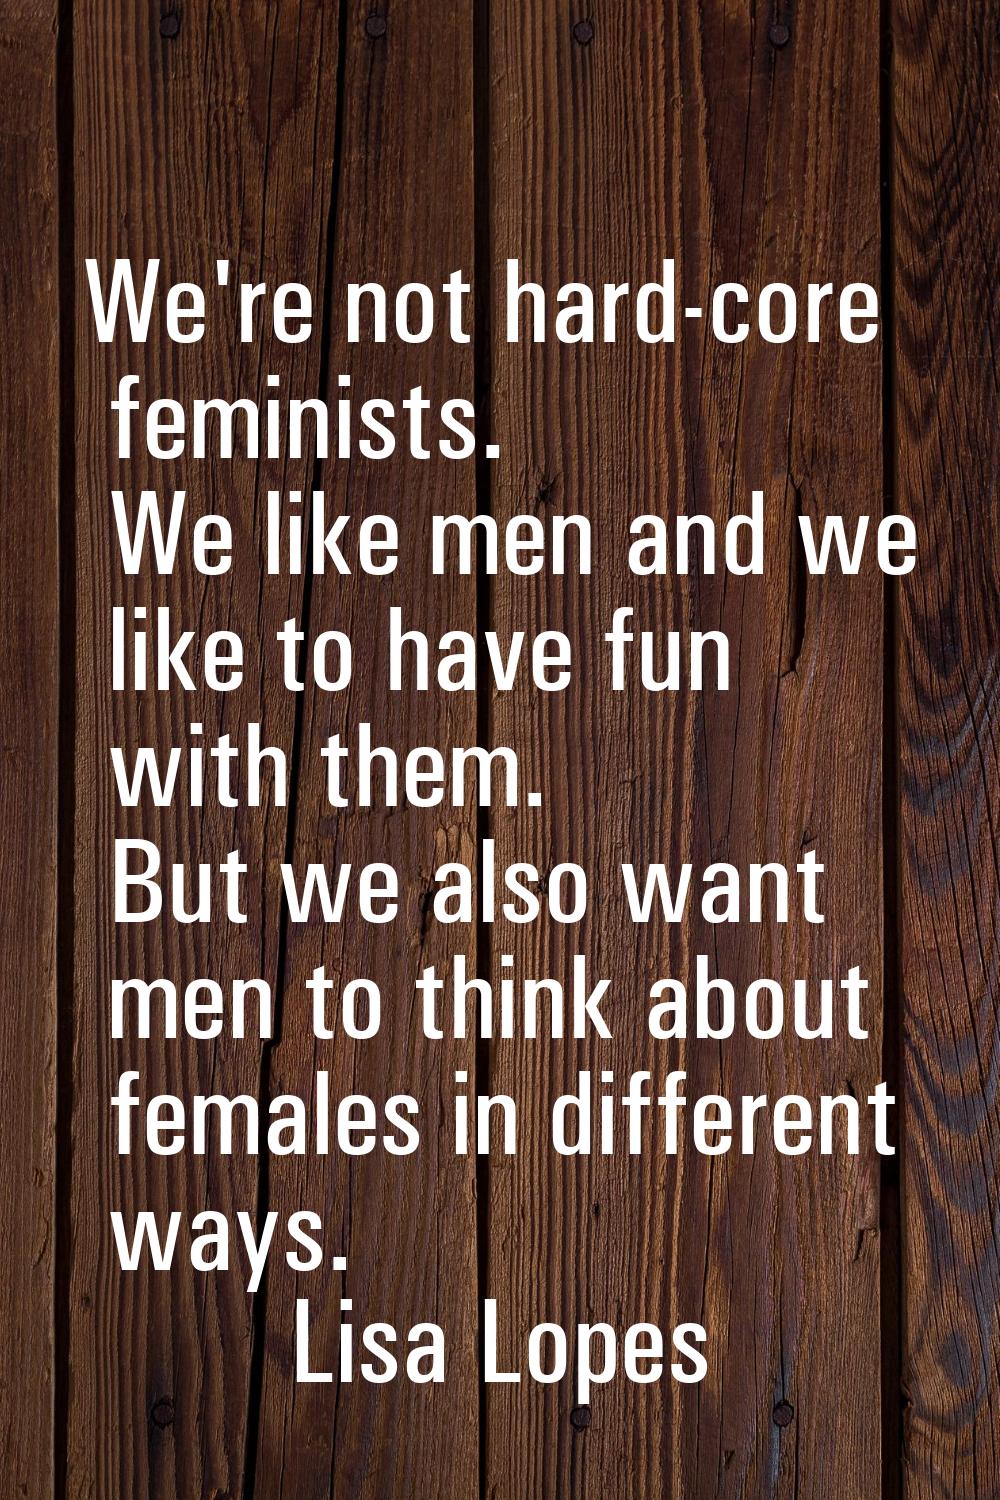 We're not hard-core feminists. We like men and we like to have fun with them. But we also want men 